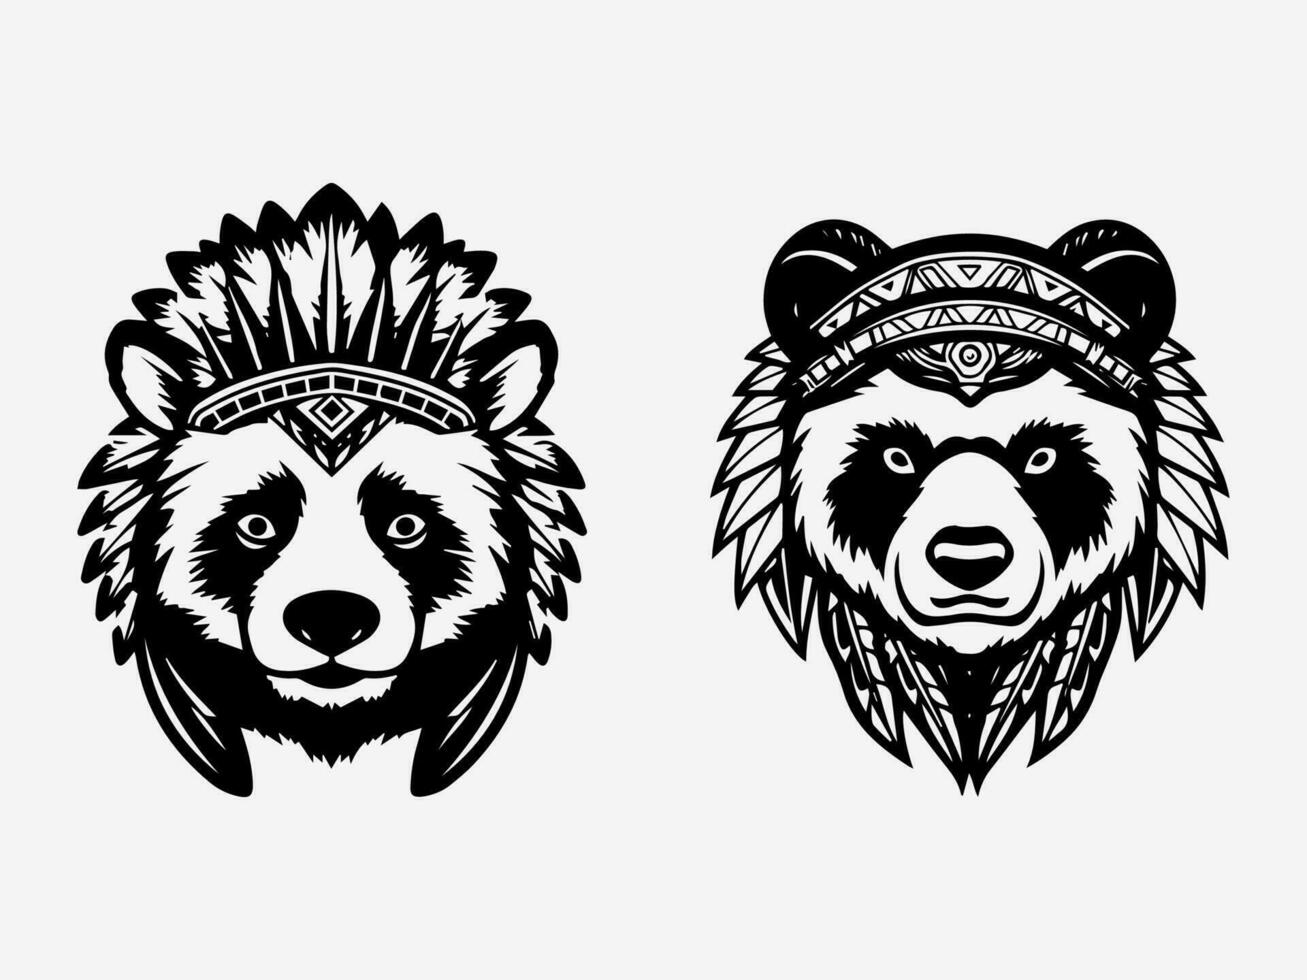 Expressive hand drawn logo design illustration featuring a panda, symbolizing gentleness, resilience, and harmony with nature vector